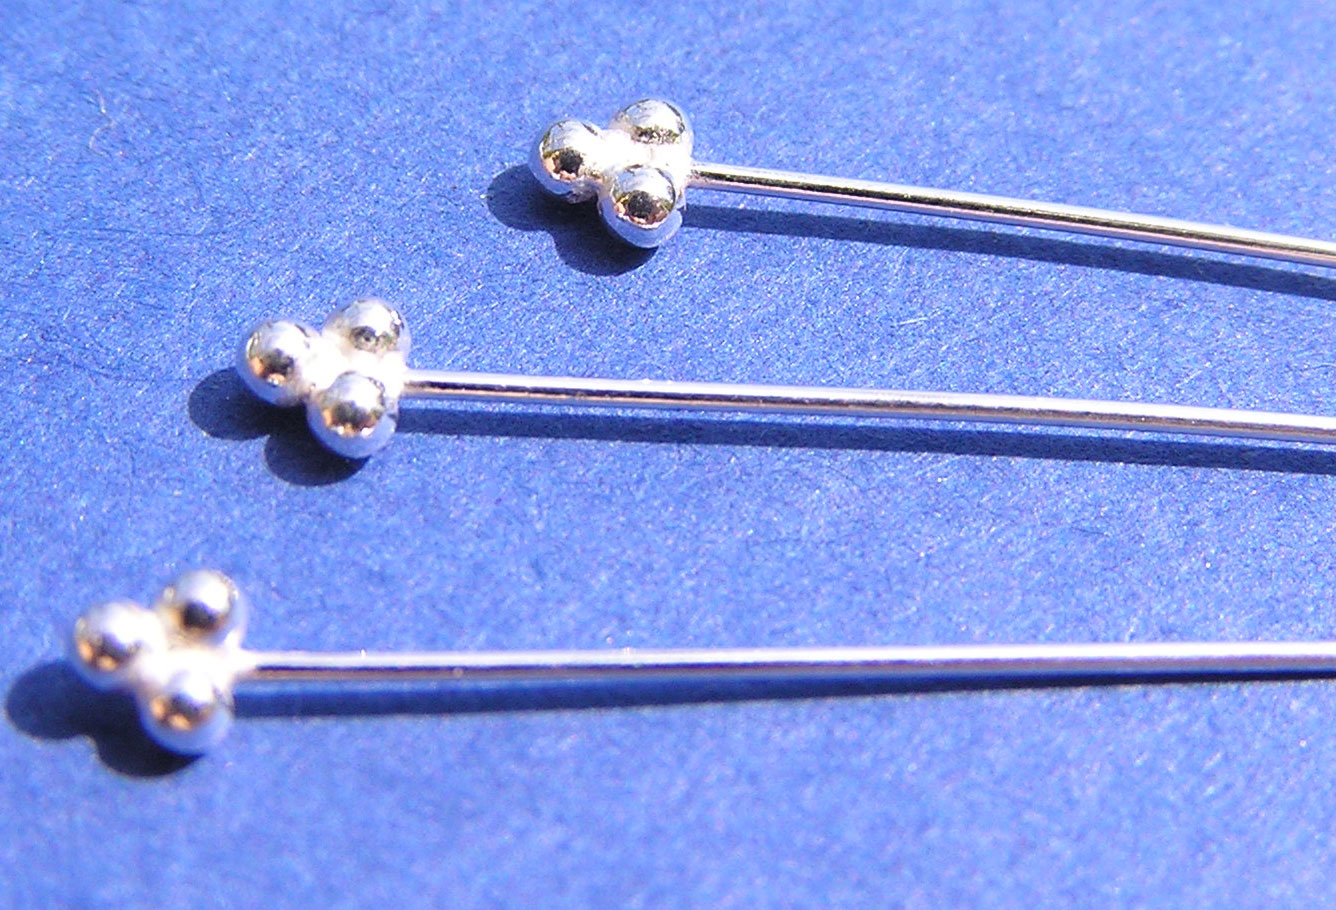  sterling silver 24 gauge (approx 0.5mm thick) triple ball end 50mm headpin 